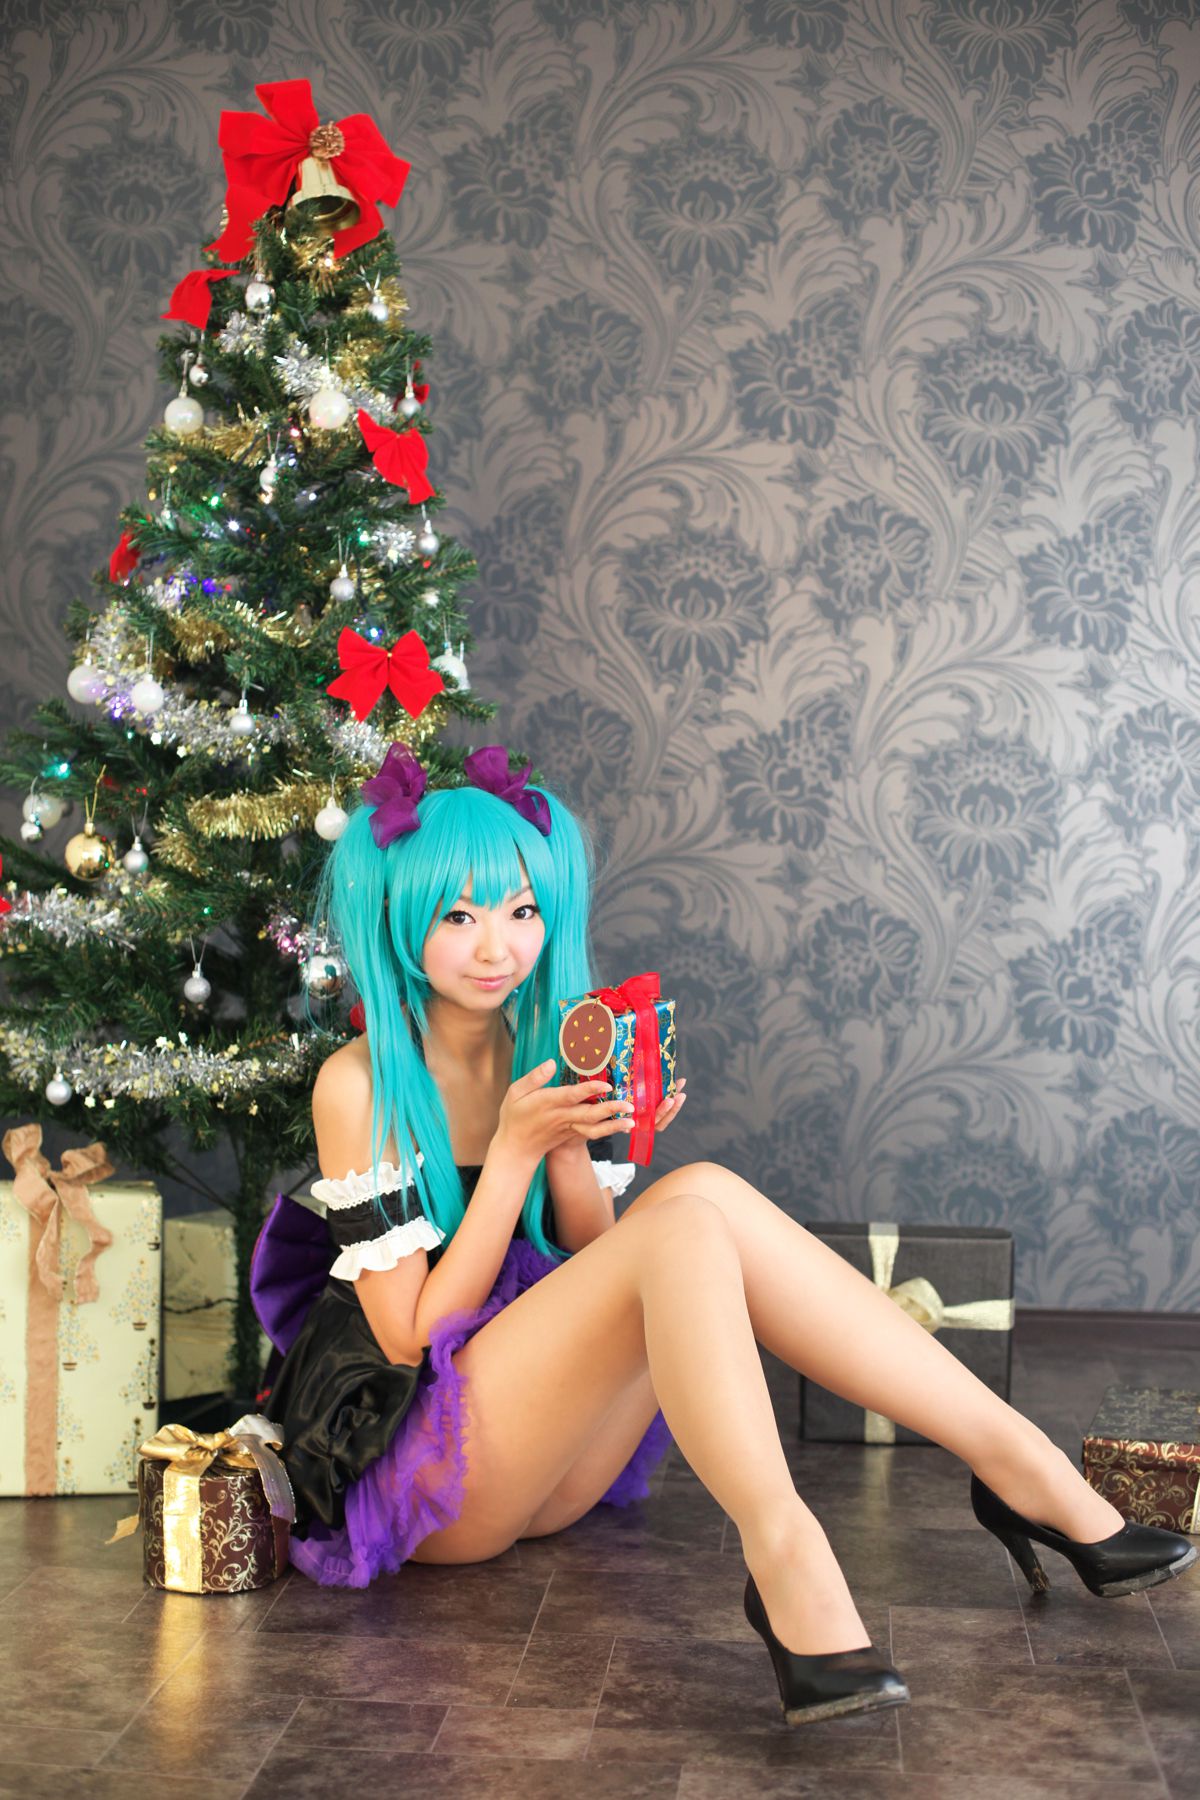 taotuhome[Cosplay] Necoco as Hatsune Miku from Vocaloid 套图第170张